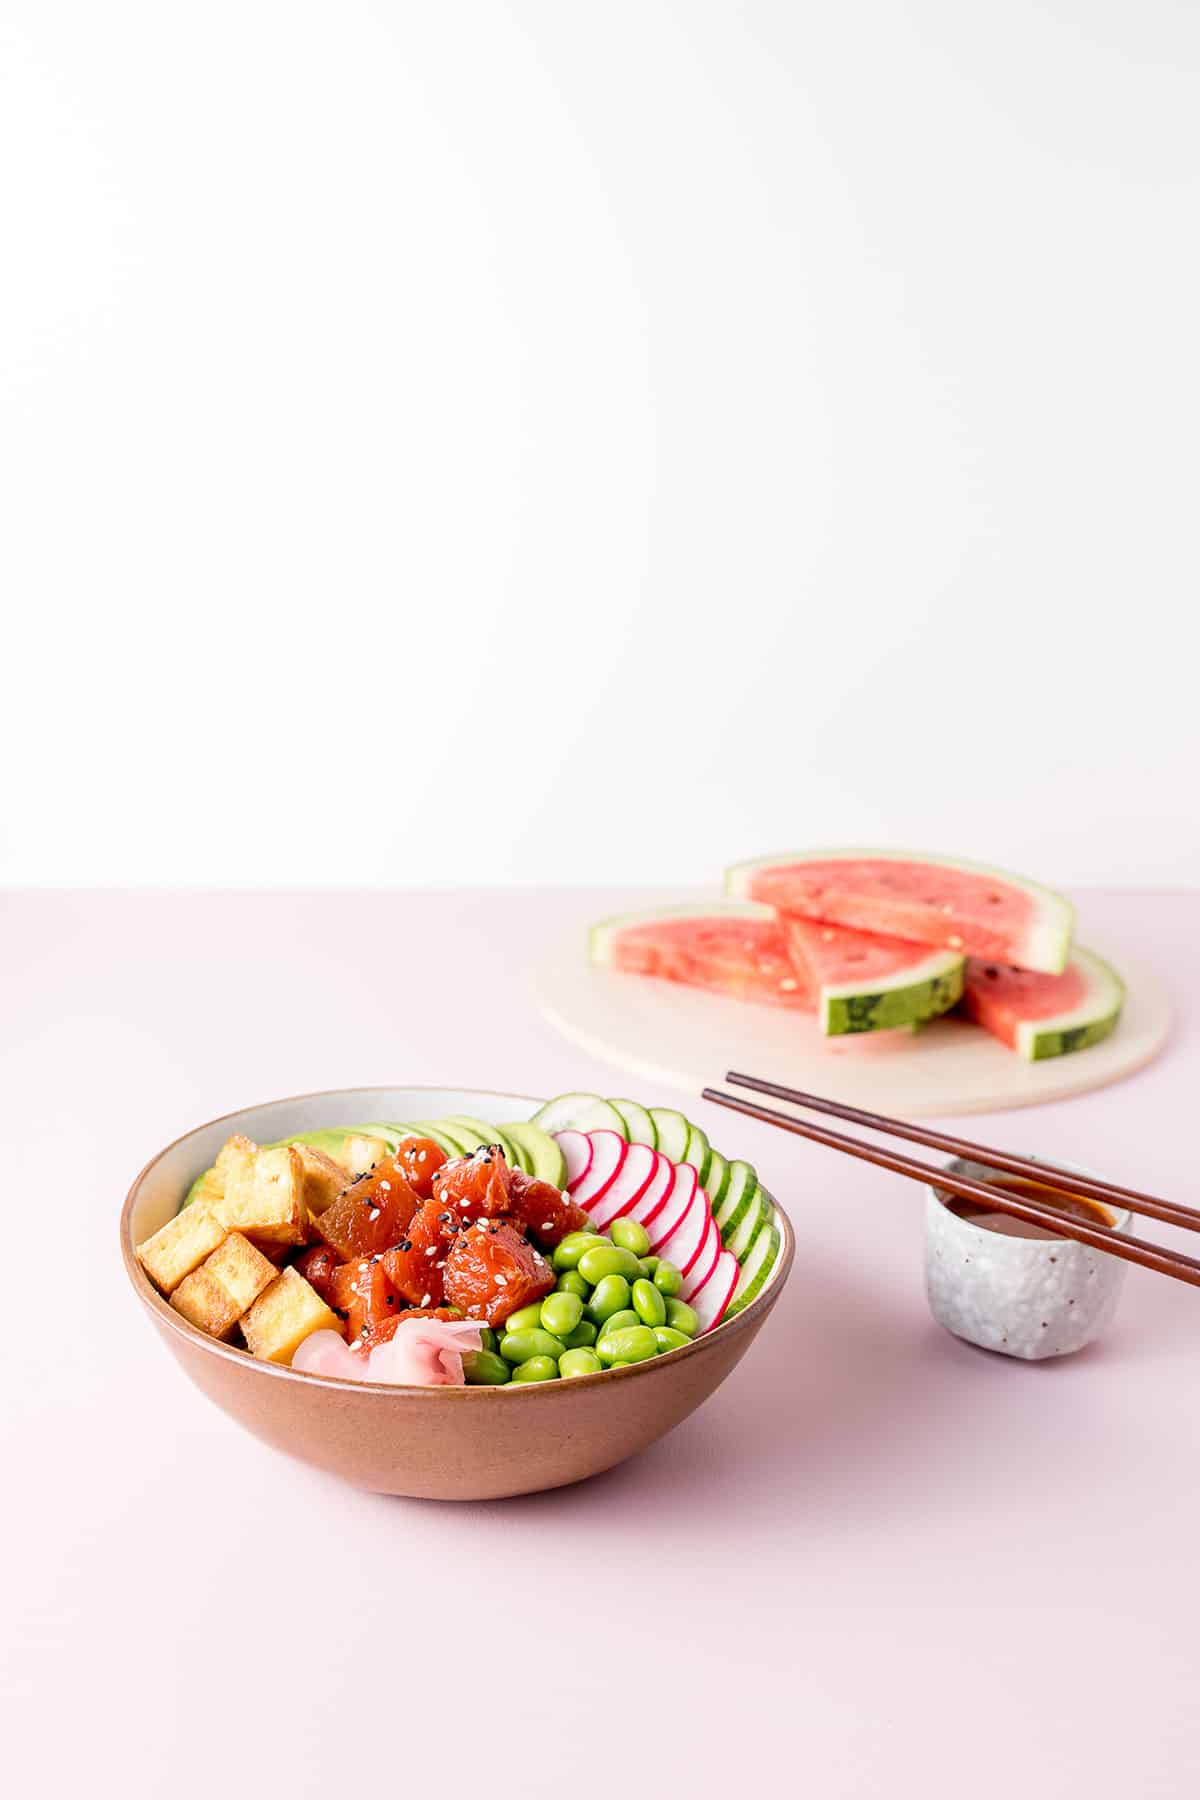 Picture of a watermelon poke bowl (A bowl with edamame beans, sliced radish, cucumber and avocado, fried tofu and marinated watermelon visible), sliced watermelon on a chopping board, and a small dish of watermelon poke marinade.